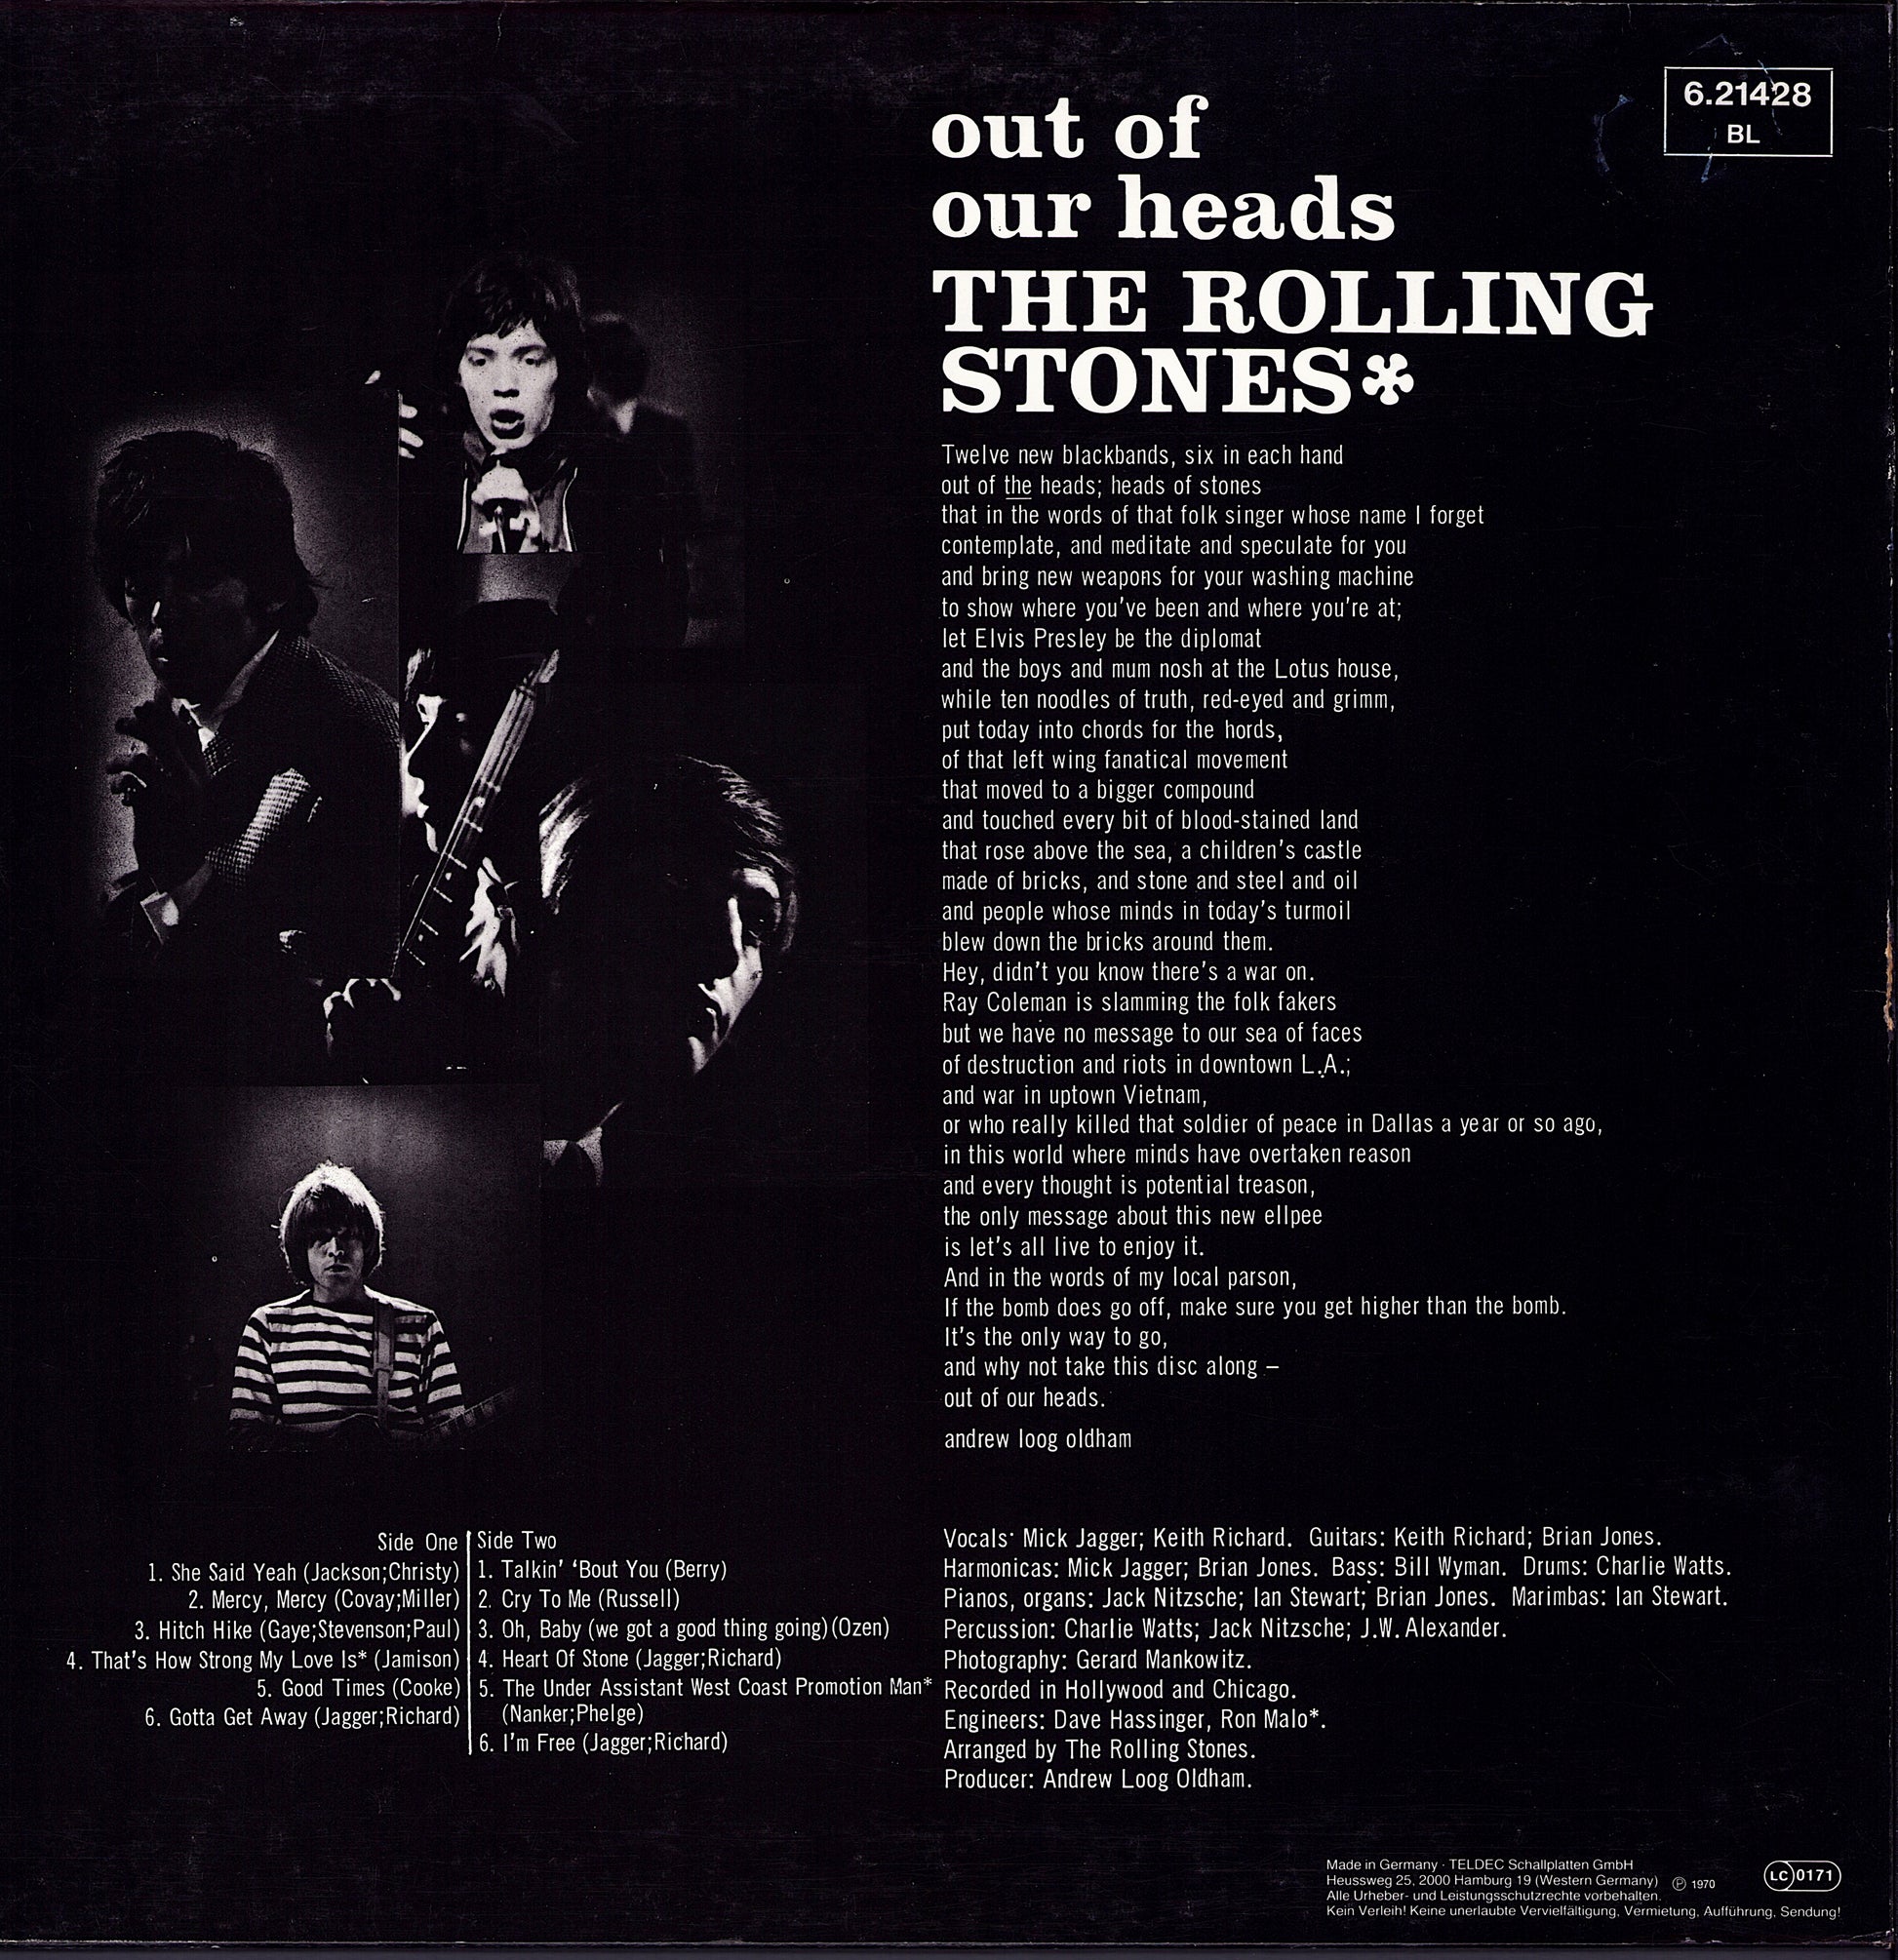 The Rolling Stones - Out of our Heads Vinyl LP